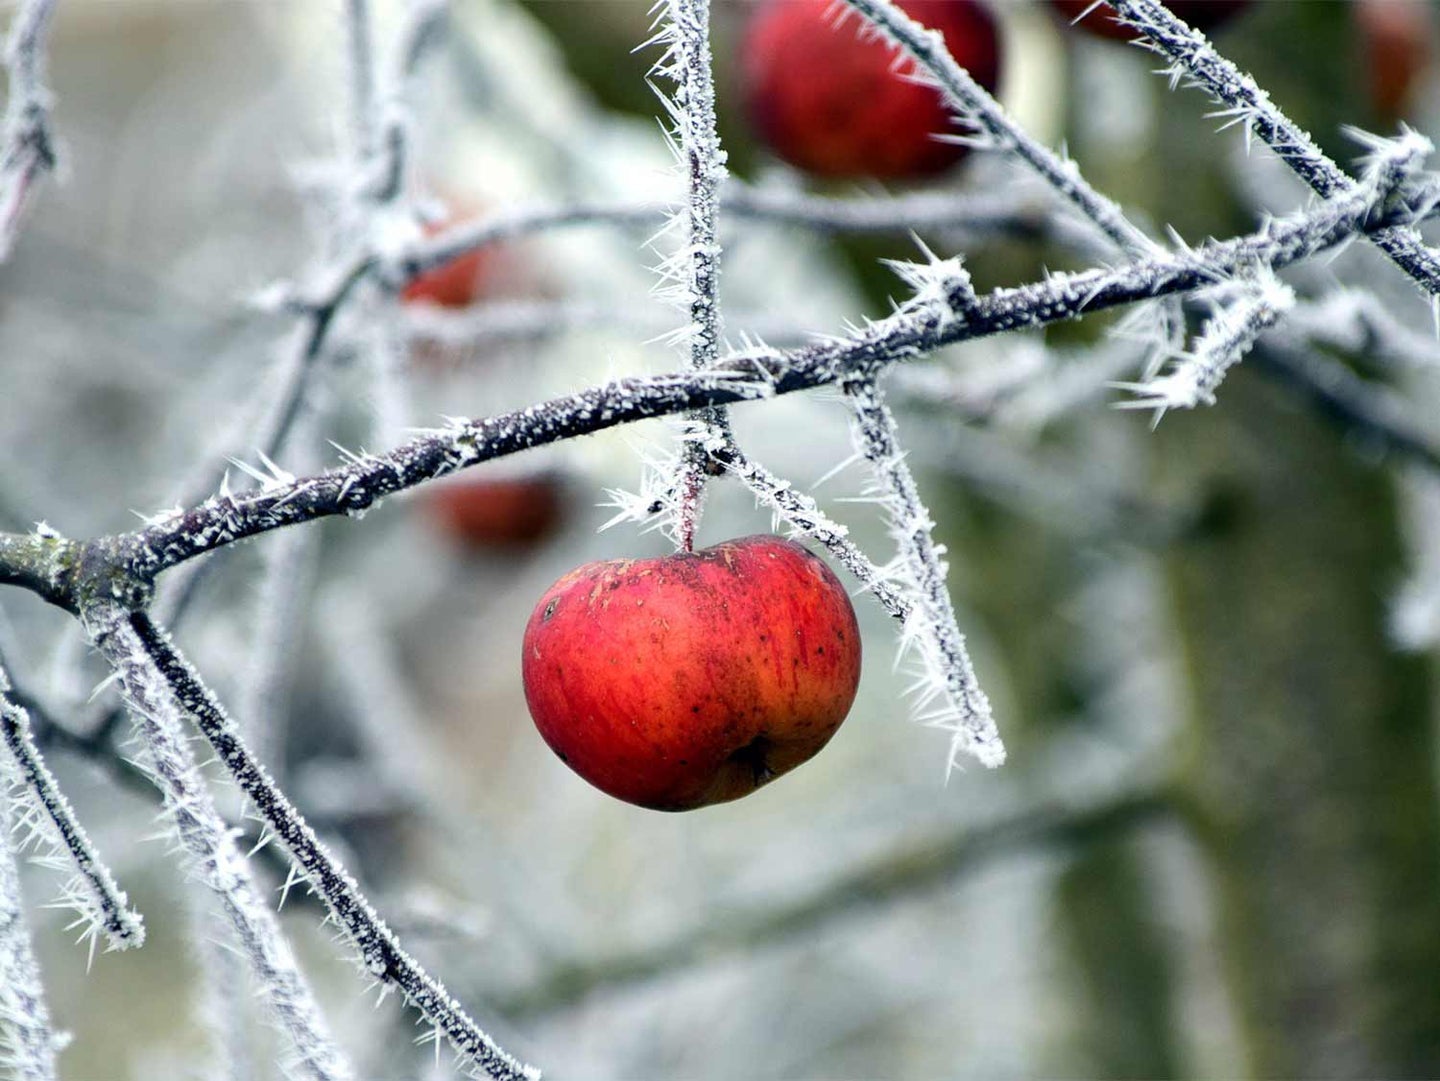 A batch of wild apples growing on a growing from branches of trees covered in ice and frost.